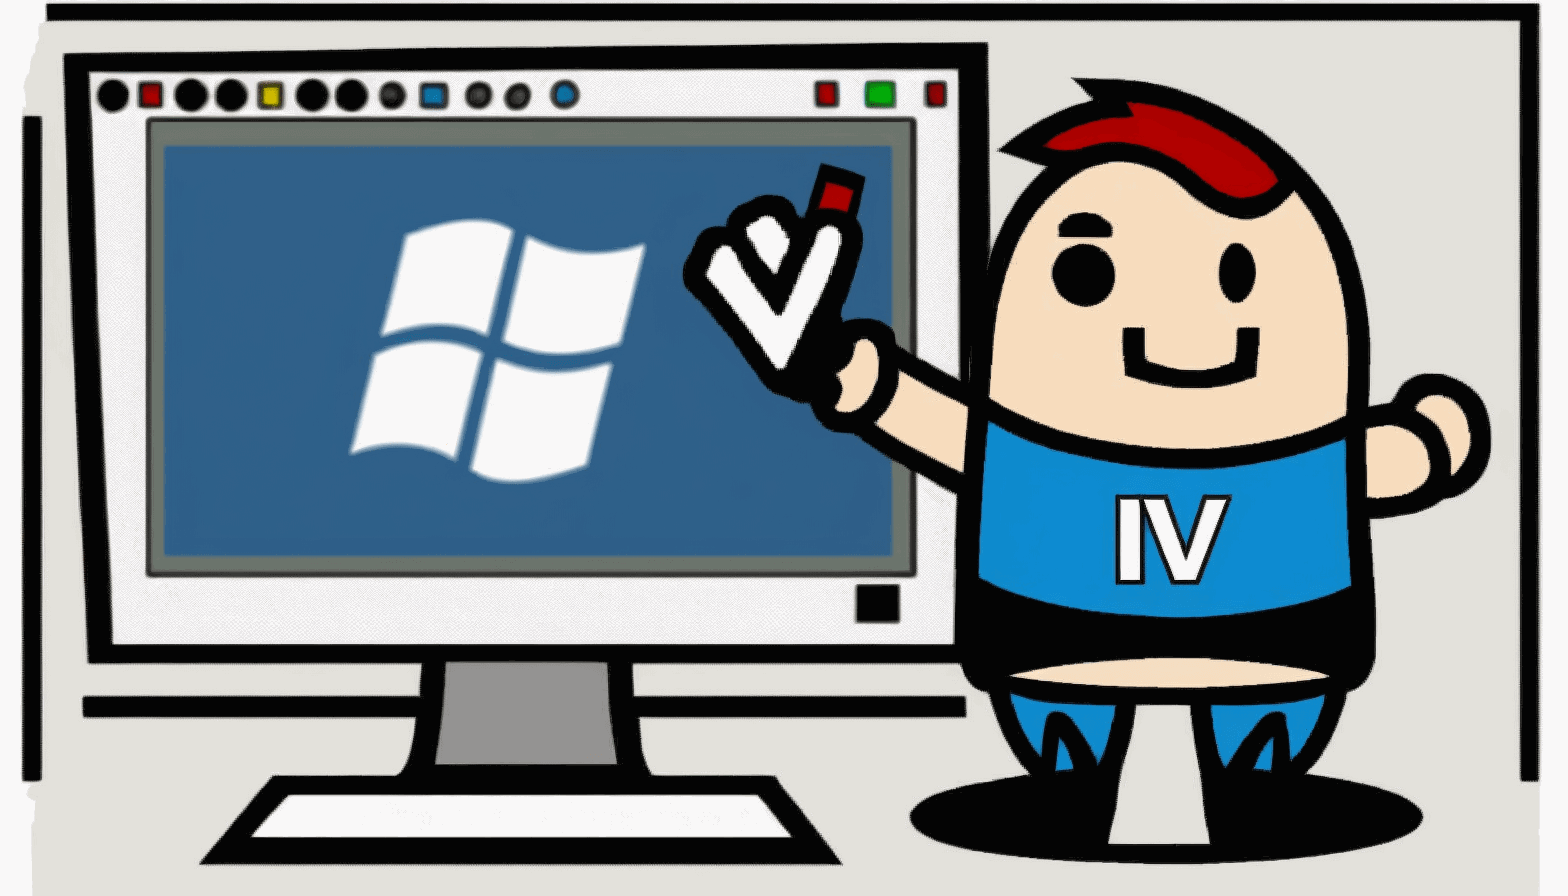 A cartoon image of a person holding a USB stick with a Windows logo and a checkmark, standing in front of a computer screen with a Windows logo on it.